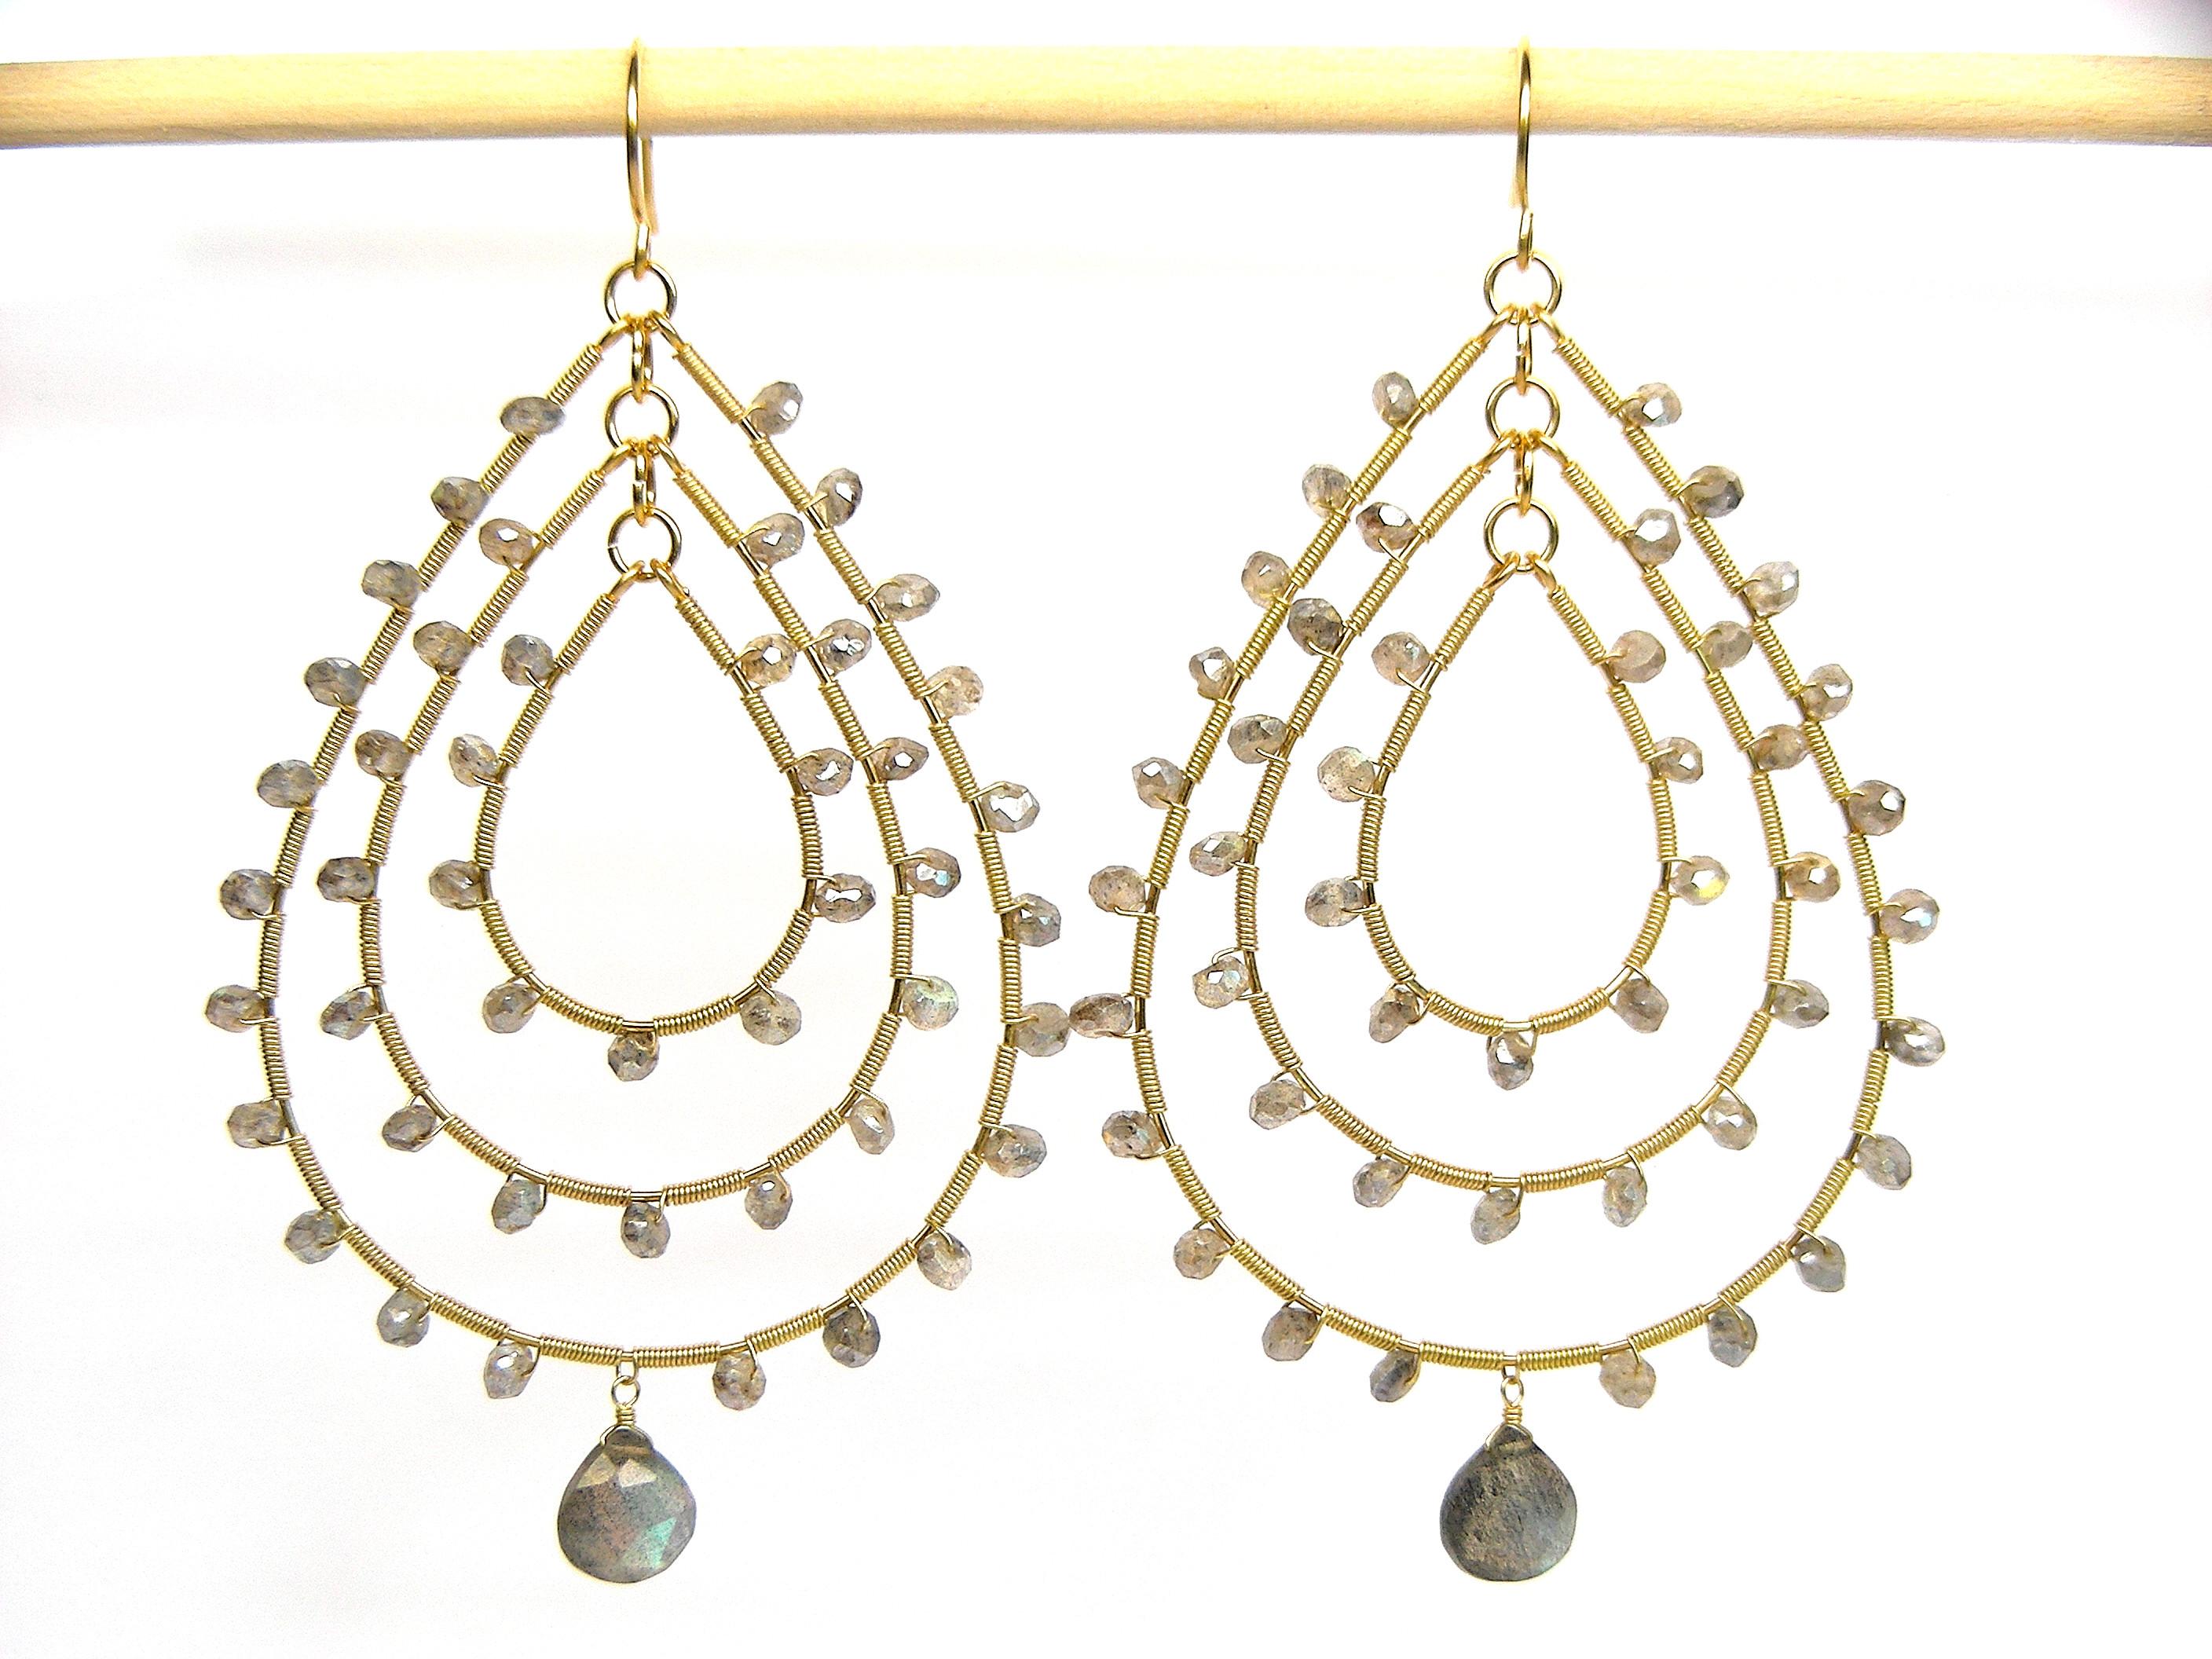 Hoop 18k Yellow Gold Earrings with Faceted Labradorites
Summer Splash is a collection of easy to wear, fashion oriented hoop earrings to wear with lightness, chic and glam only this pieces for this collection 
They come in 6 variations of